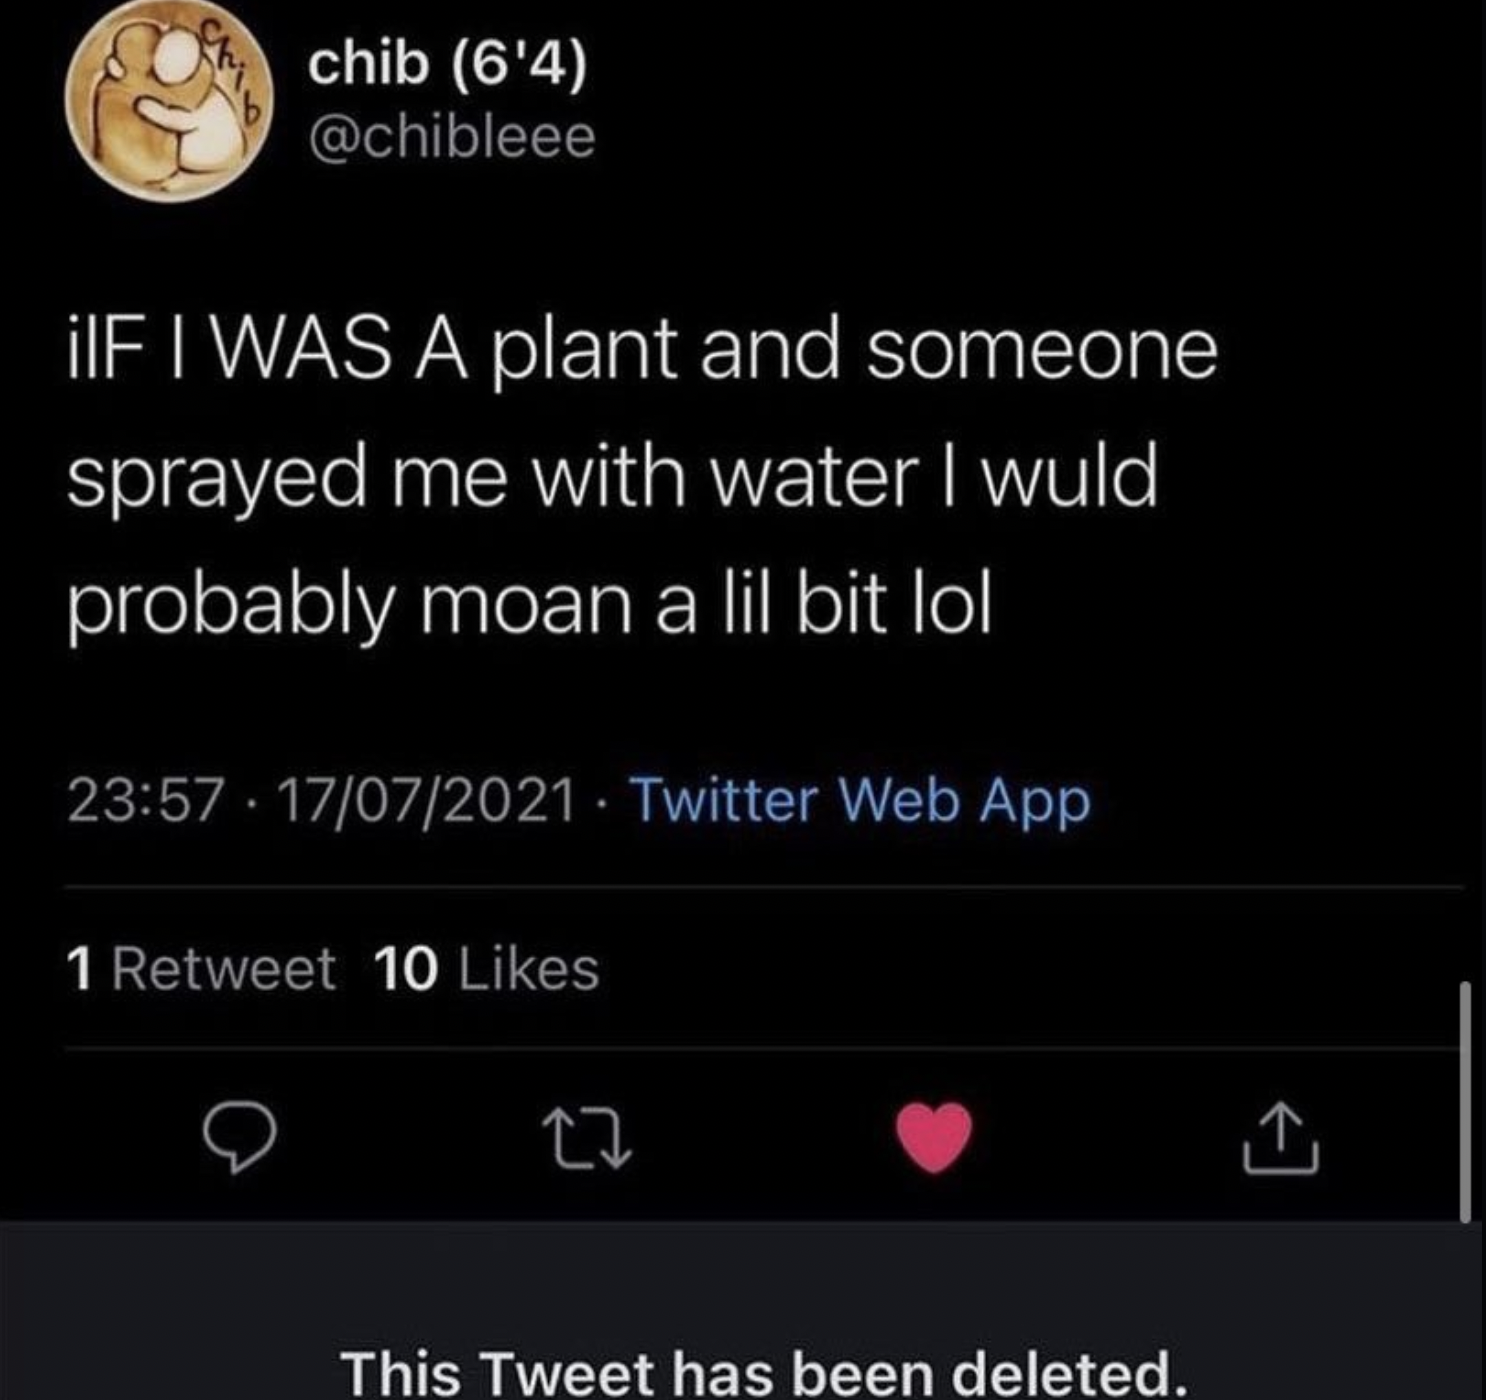 screenshot - chib 6'4 iIF I Was A plant and someone sprayed me with water I wuld probably moan a lil bit lol 17072021 Twitter Web App 1 Retweet 10 This Tweet has been deleted.